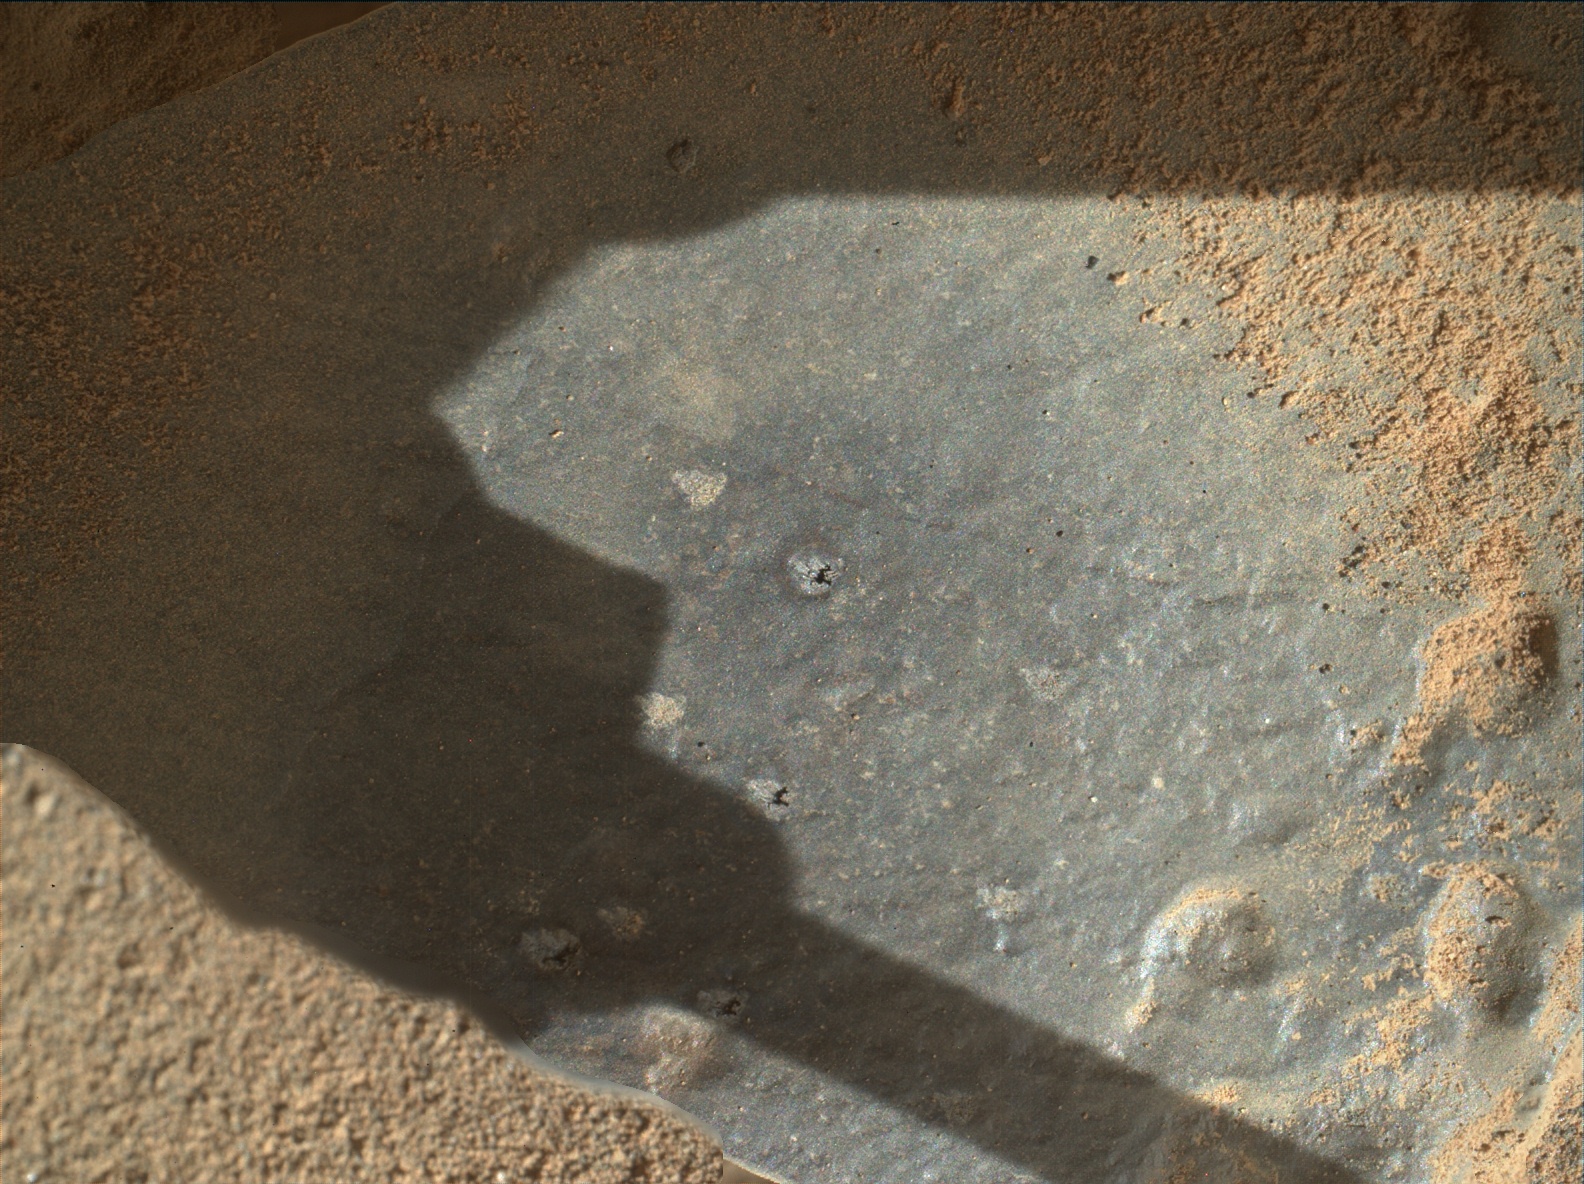 Nasa's Mars rover Curiosity acquired this image using its Mars Hand Lens Imager (MAHLI) on Sol 627